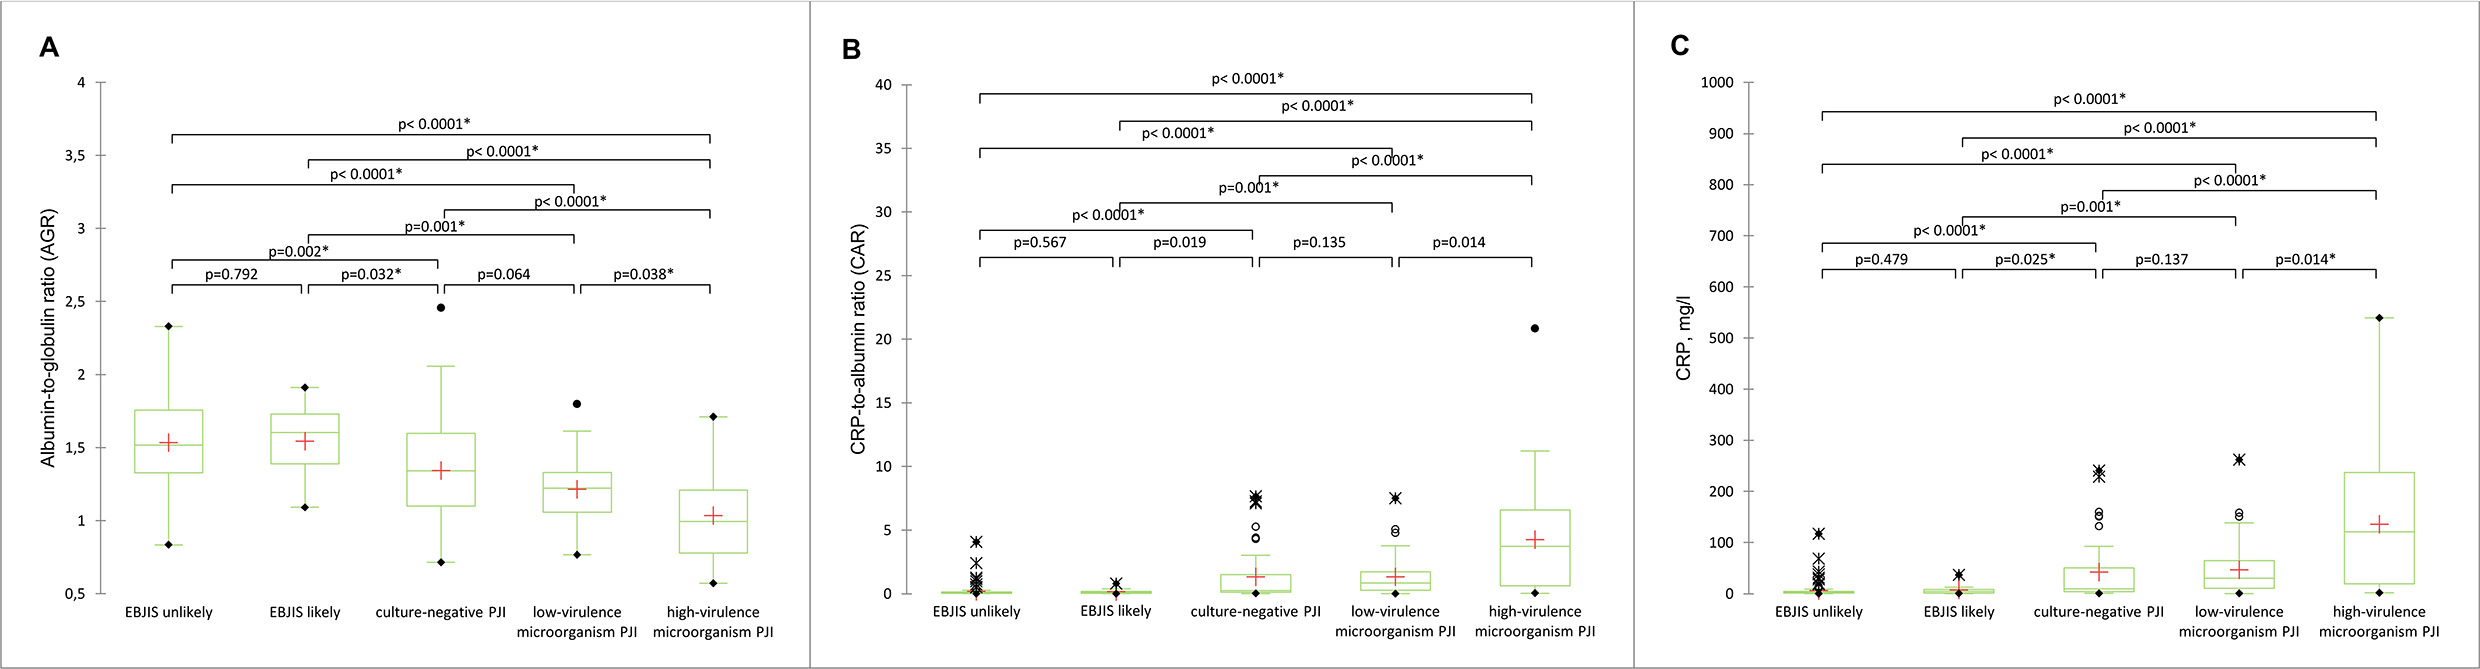 Fig. 1 
            Boxplots of a) serum albumin-to-globulin ratio (AGR), b) serum CRP-to-albumin ratio, and c) serum CRP levels in aseptic and septic subgroups. Asterisks (*) indicate a significant difference between groups (Dunn’s test with Bonferroni correction). + indicates mean values, ∙ minimum and maximum, and ○ outliers. EBJIS, European Bone and Joint Infection Society criteria for periprosthetic joint infection; PJI, periprosthetic joint infection.
          